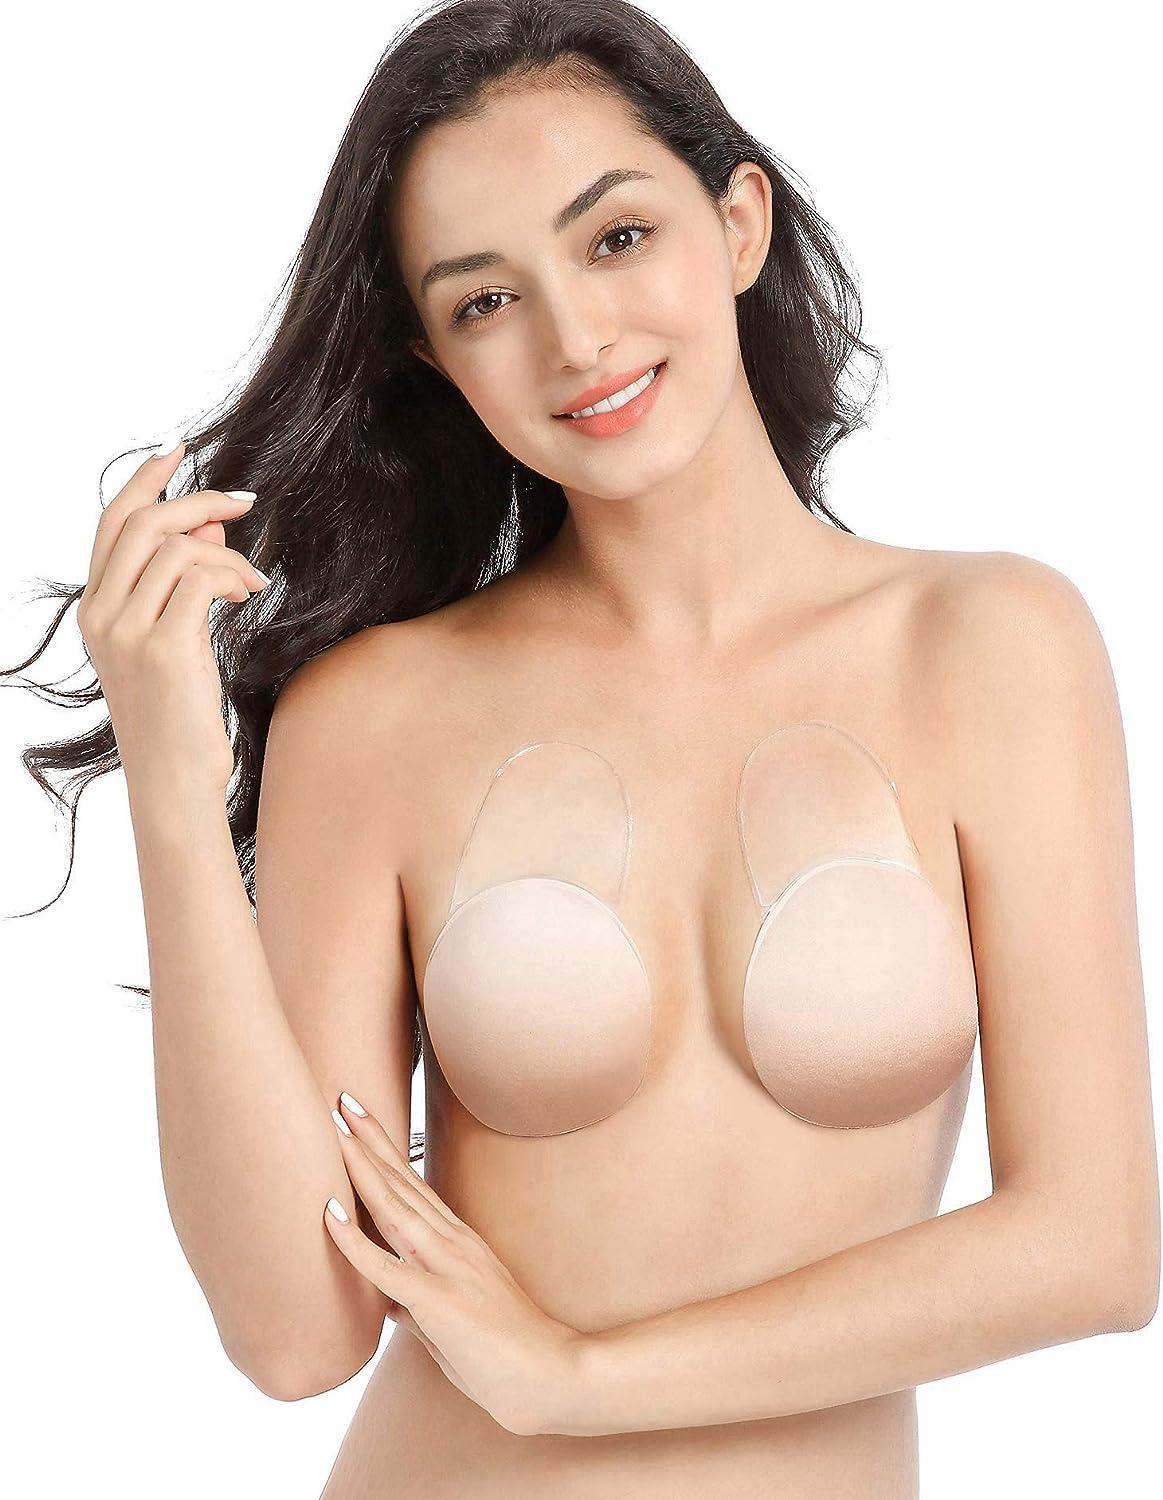 Breast Self Adhesive Reusable Conceal Silicone Lift Bra Nipple